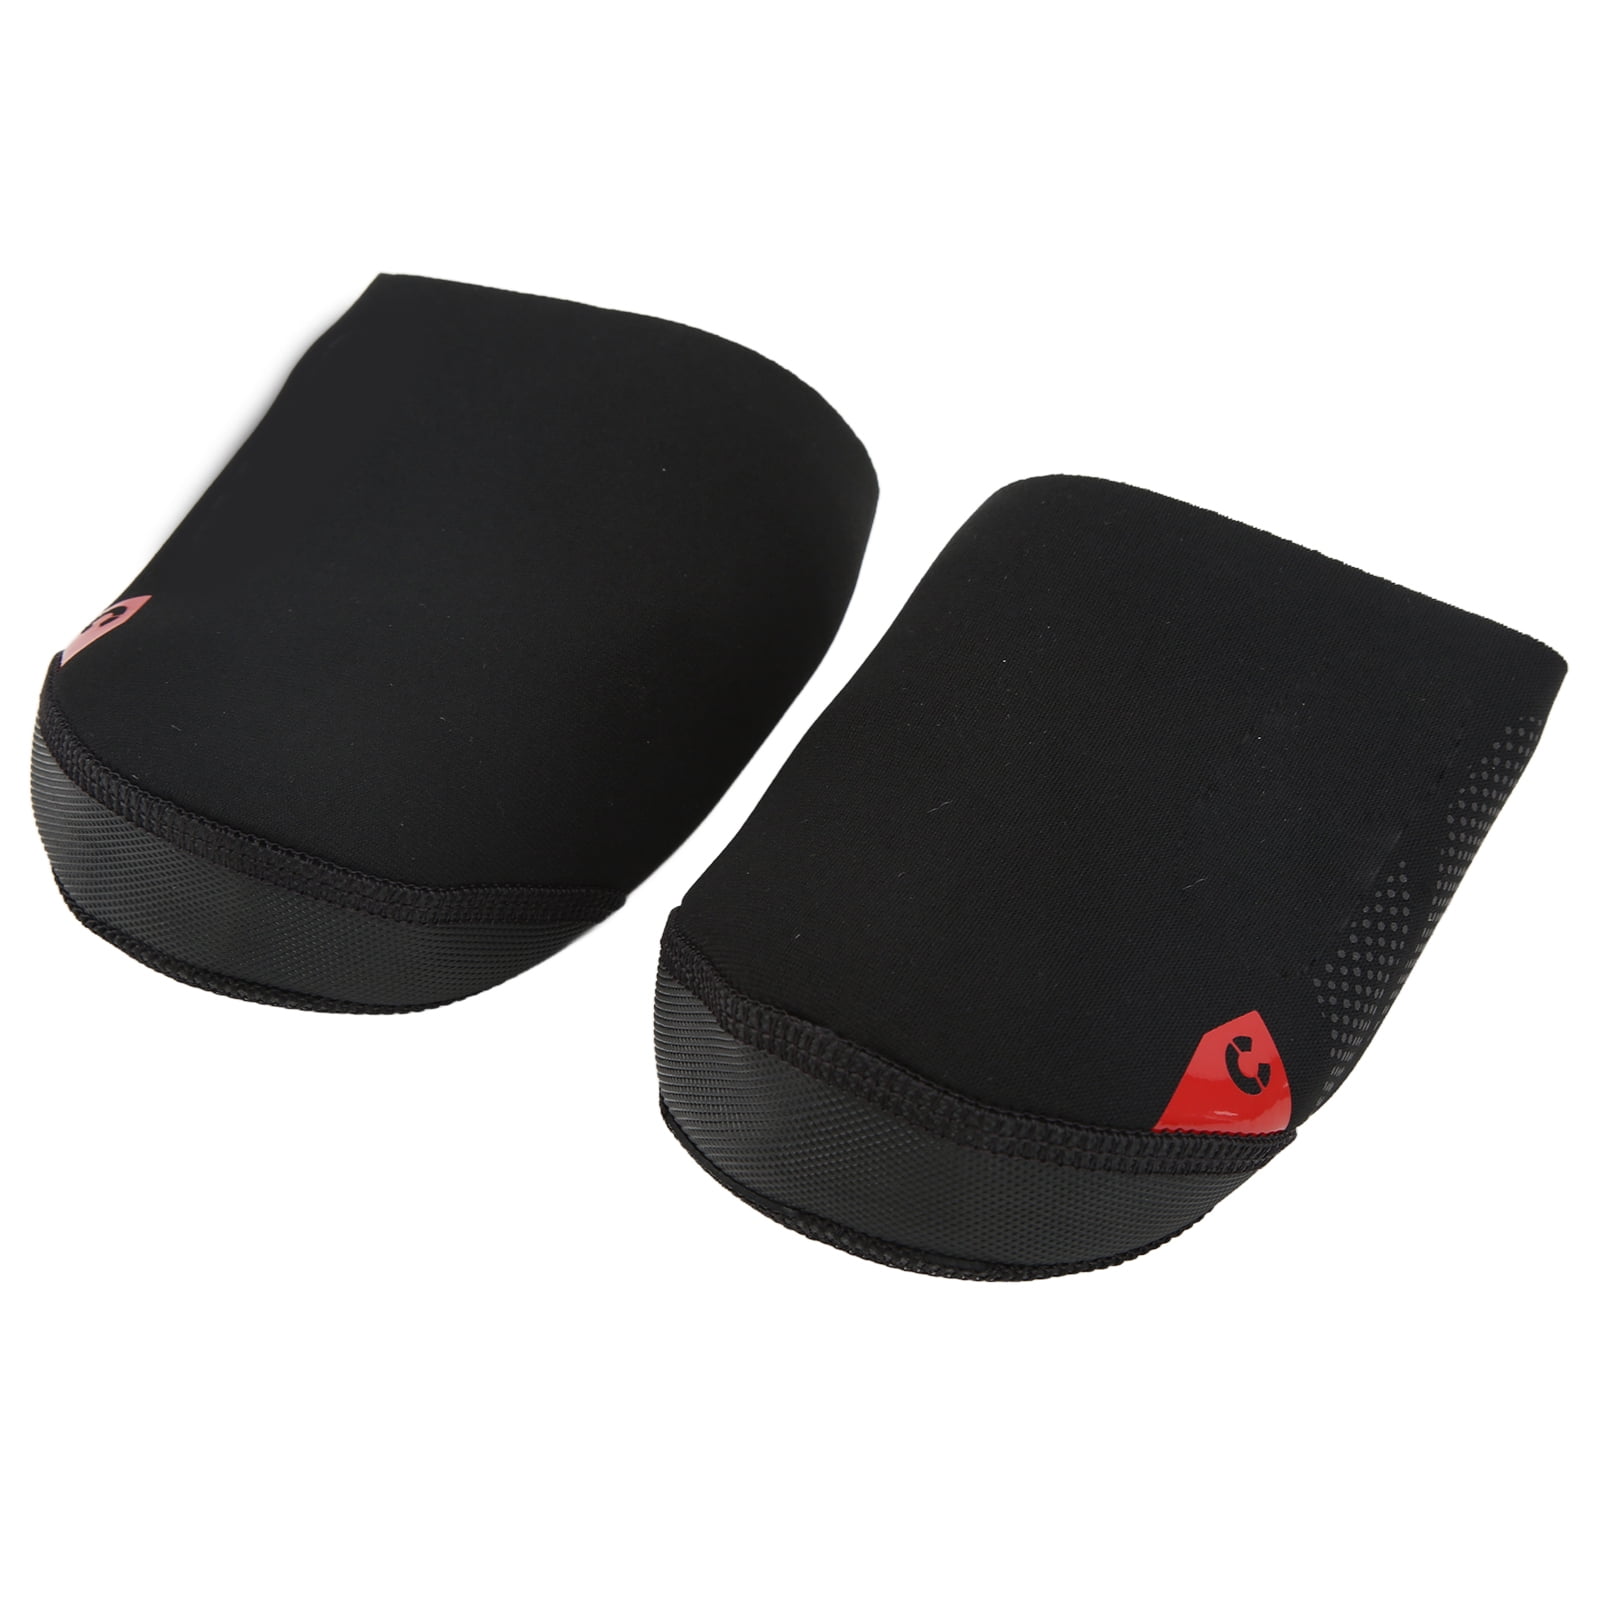 2X Outdoor Sport Cycling Bike Bicycle Shoe Toe Cover tector Overshoes Warmer ss 